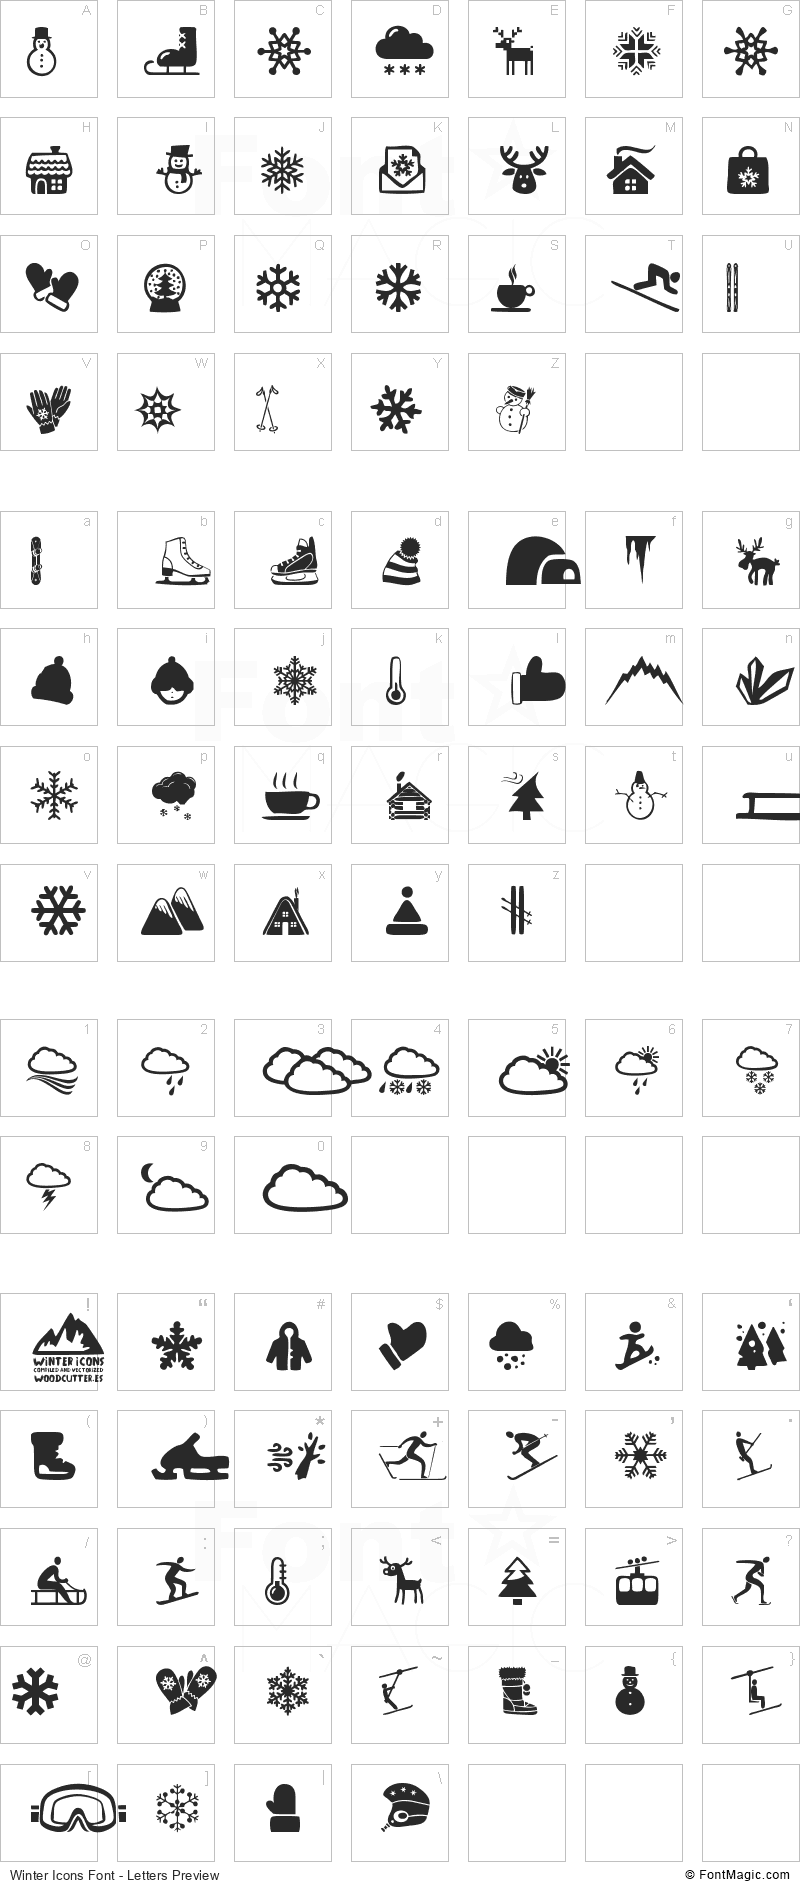 Winter Icons Font - All Latters Preview Chart